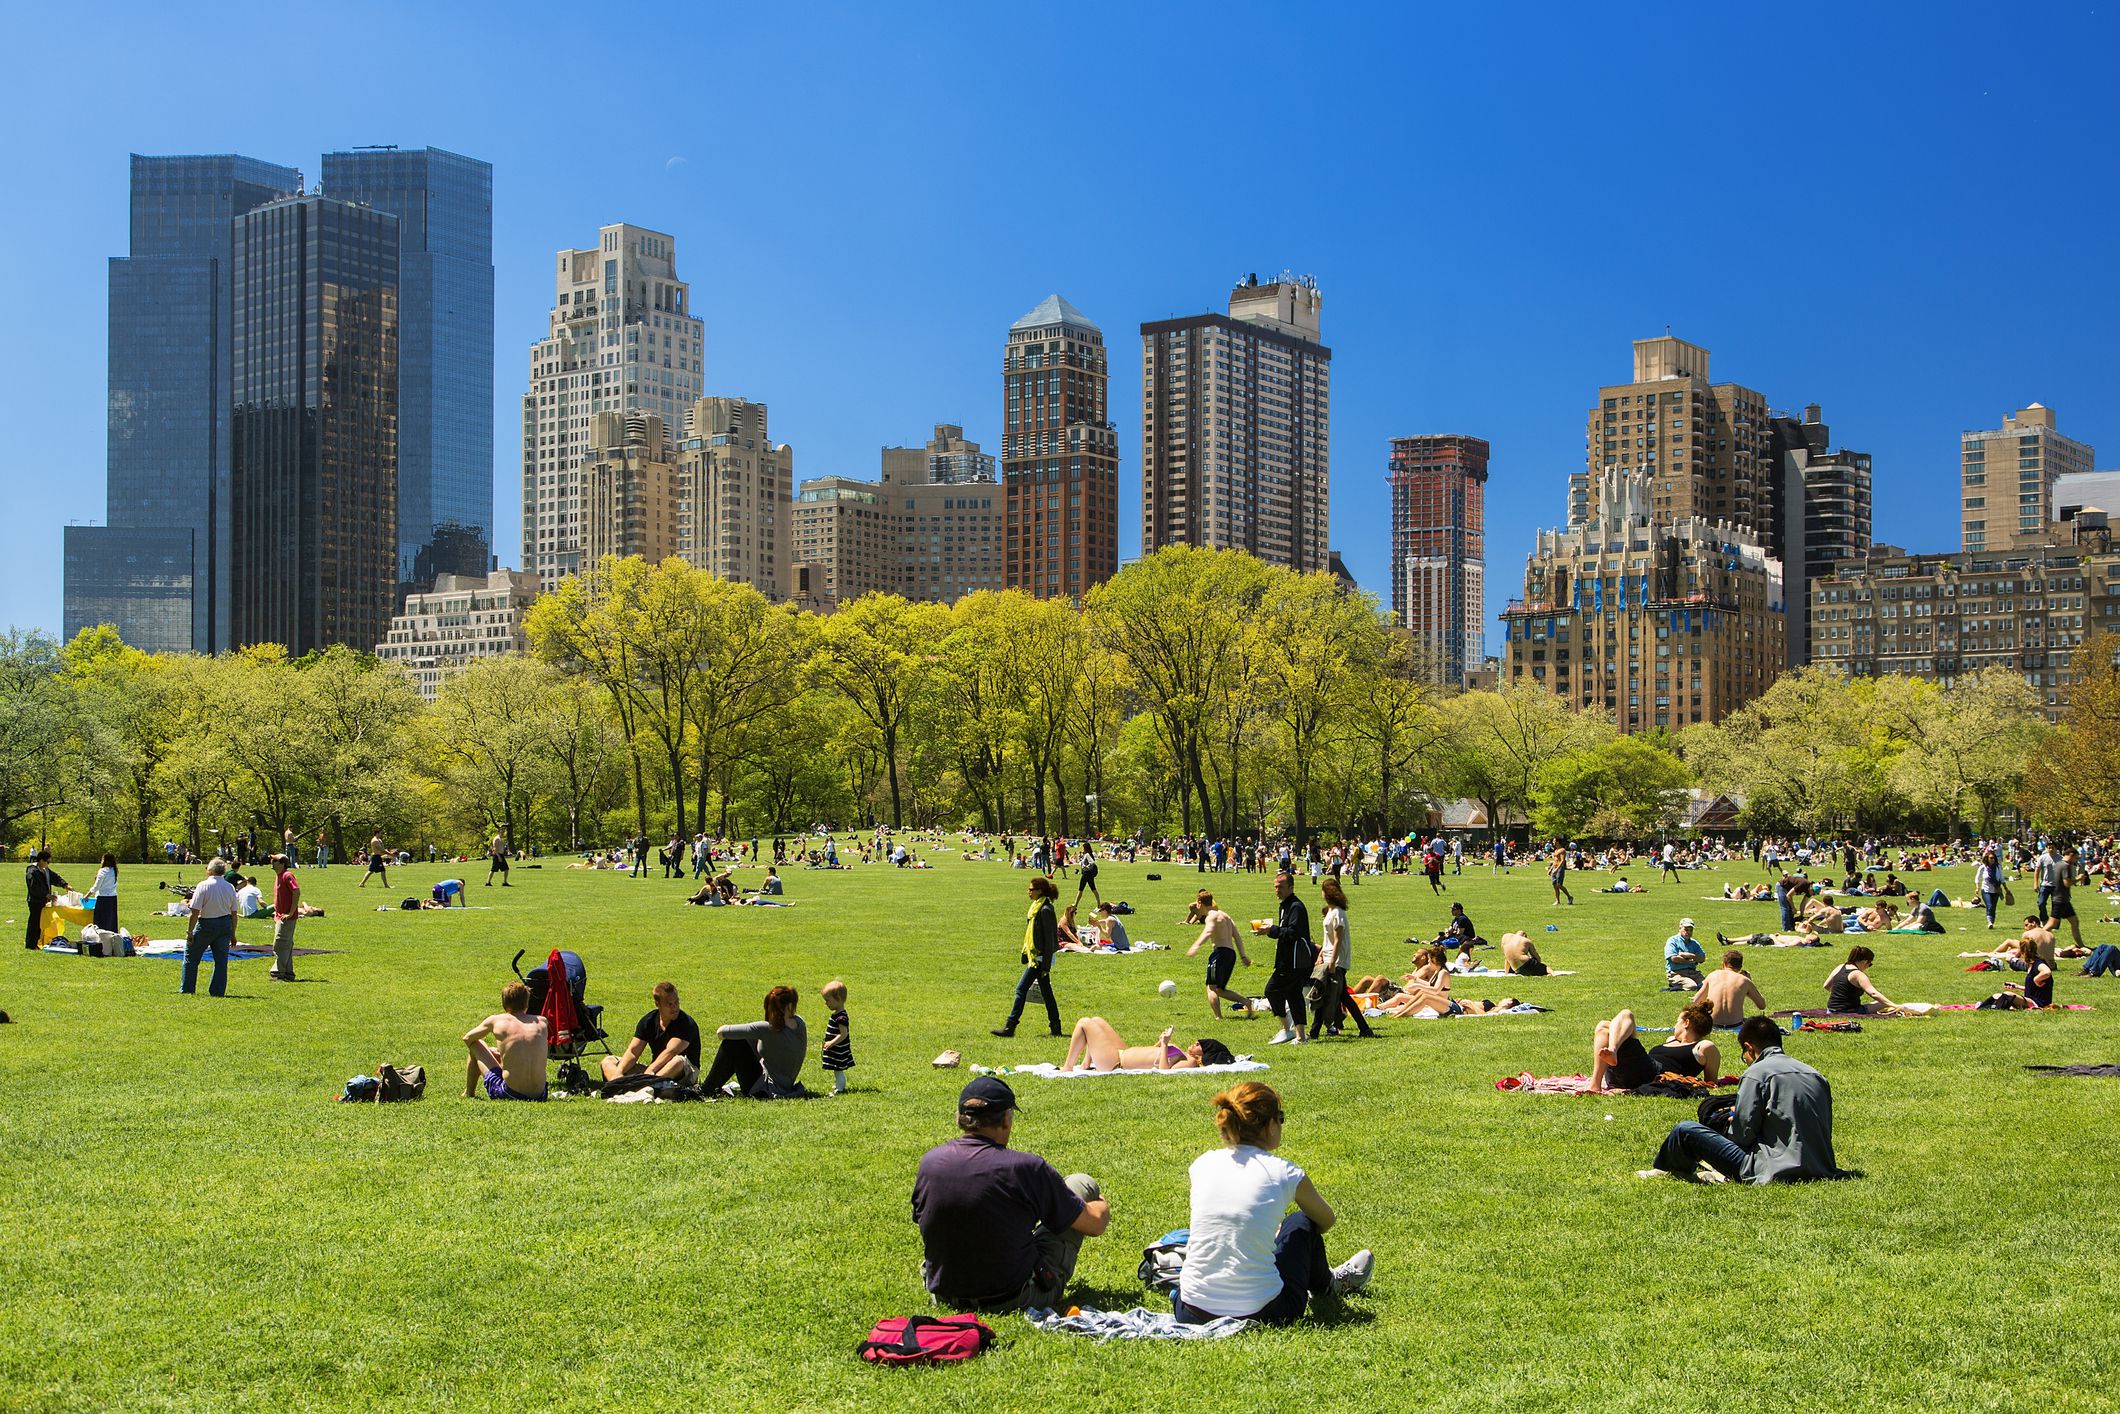 BEATBRDG Music Industry Internships - Summer day out in New York's Central Park